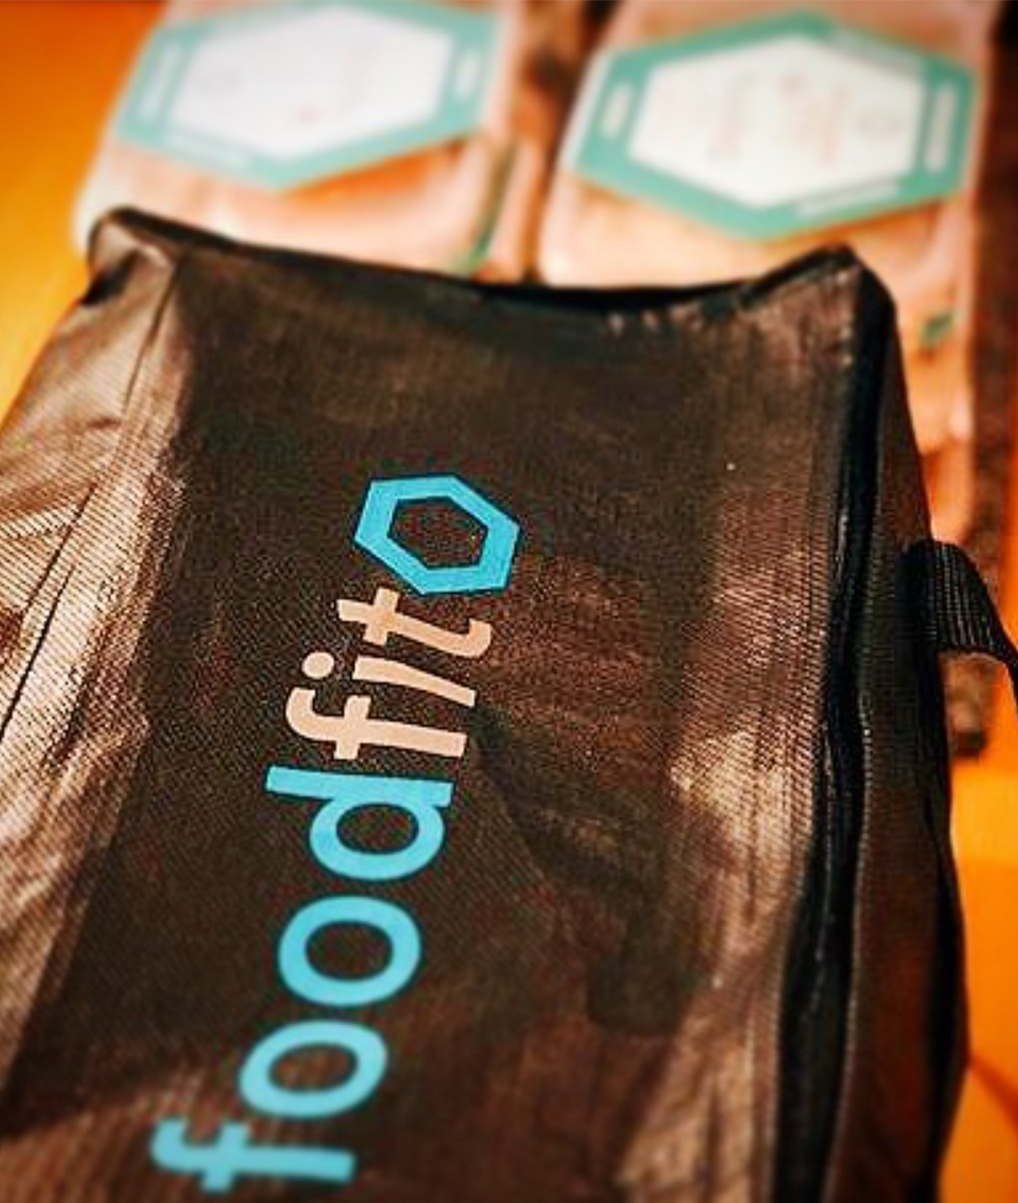 A Food Fit bag with Food Fit subscription boxes shows the staff and how they personalise your meals to achieve your goals.